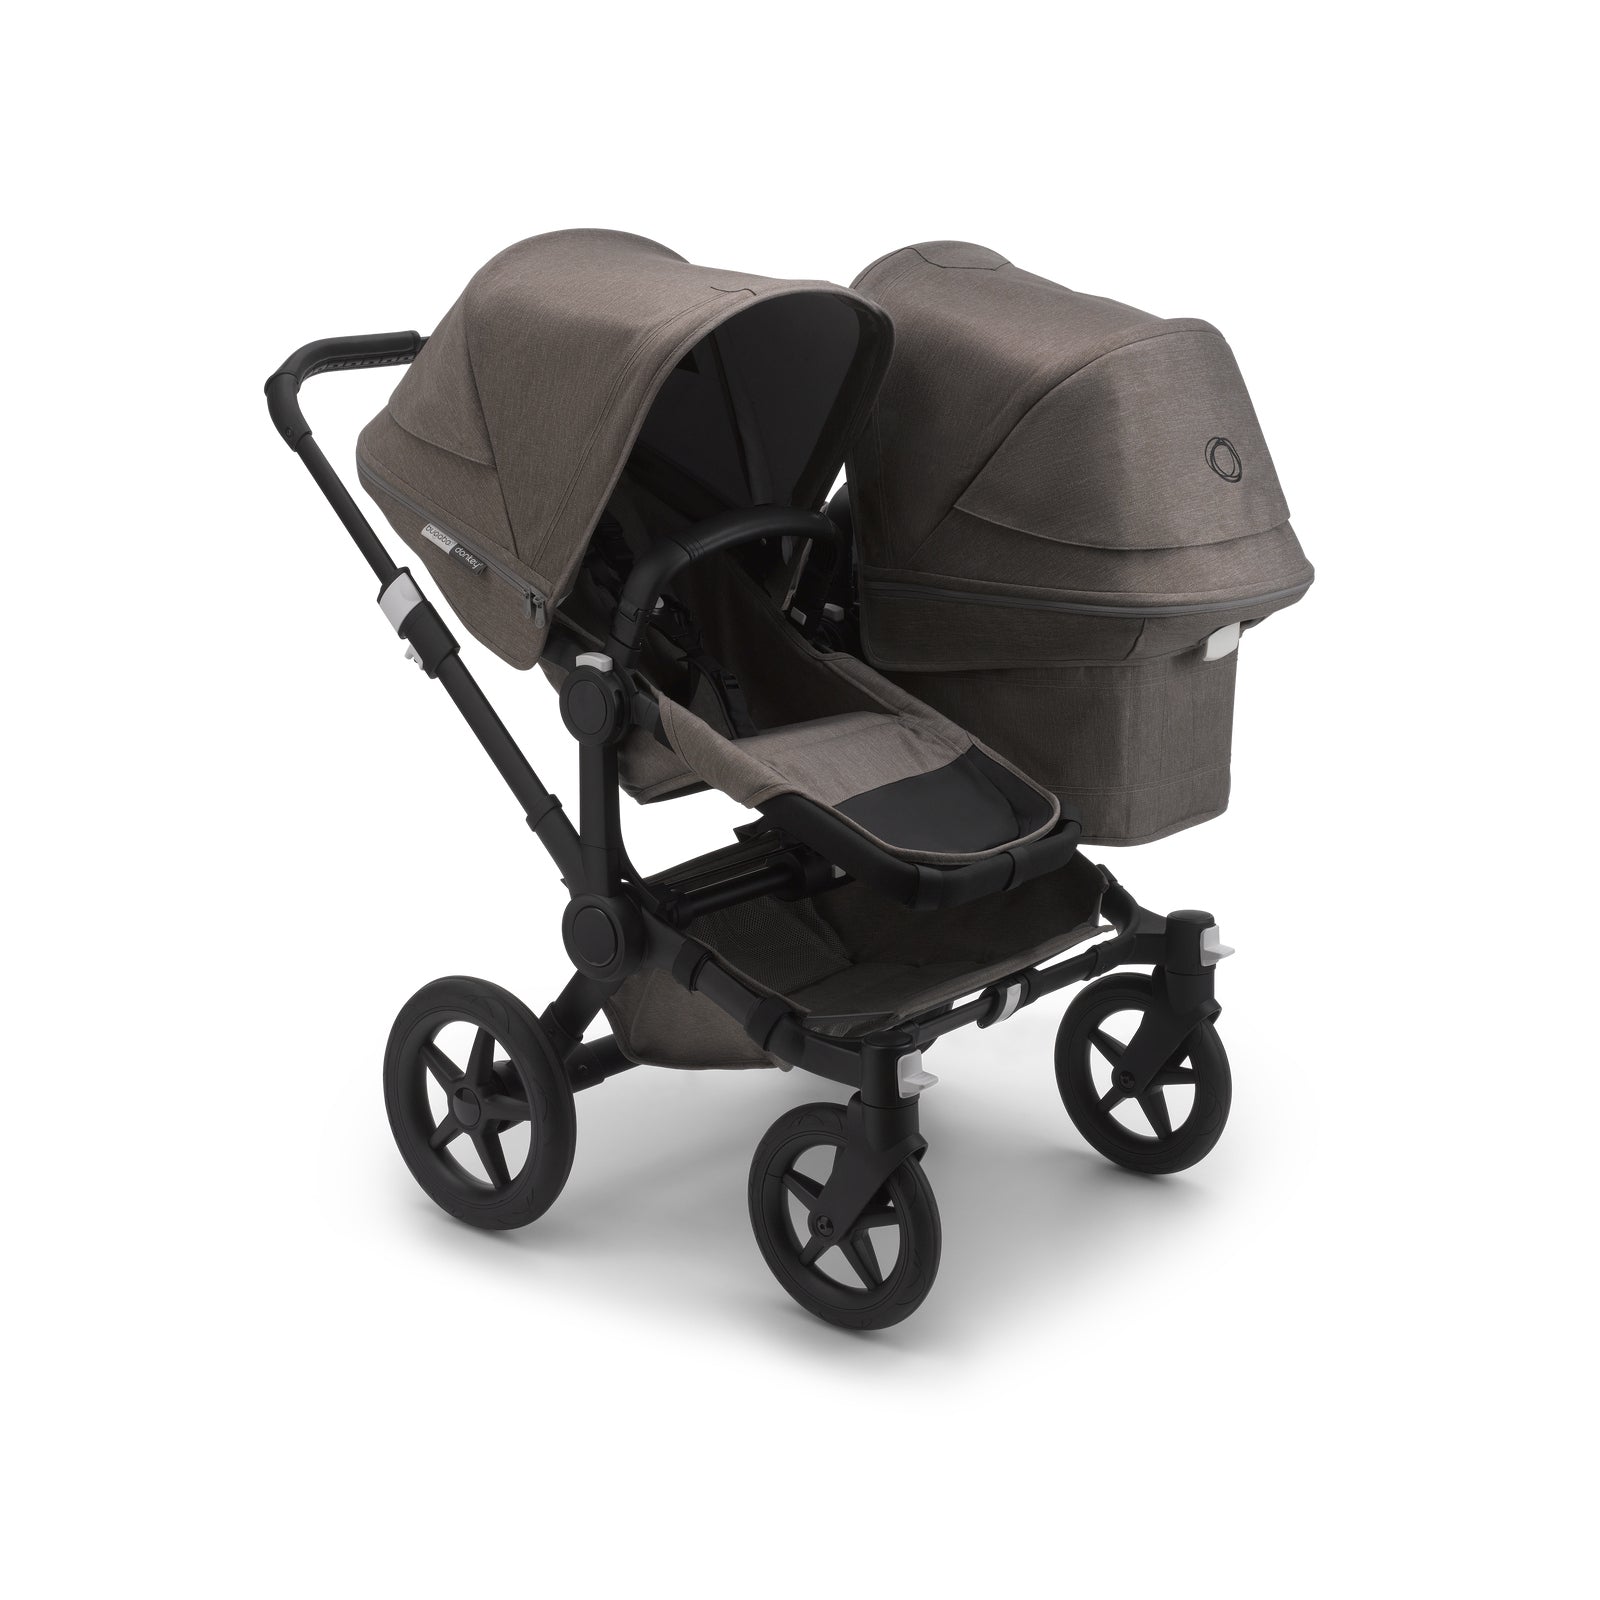 Bugaboo Donkey 3 Duo Seat and Carrycot Pushchair - Mineral Taupe Melange